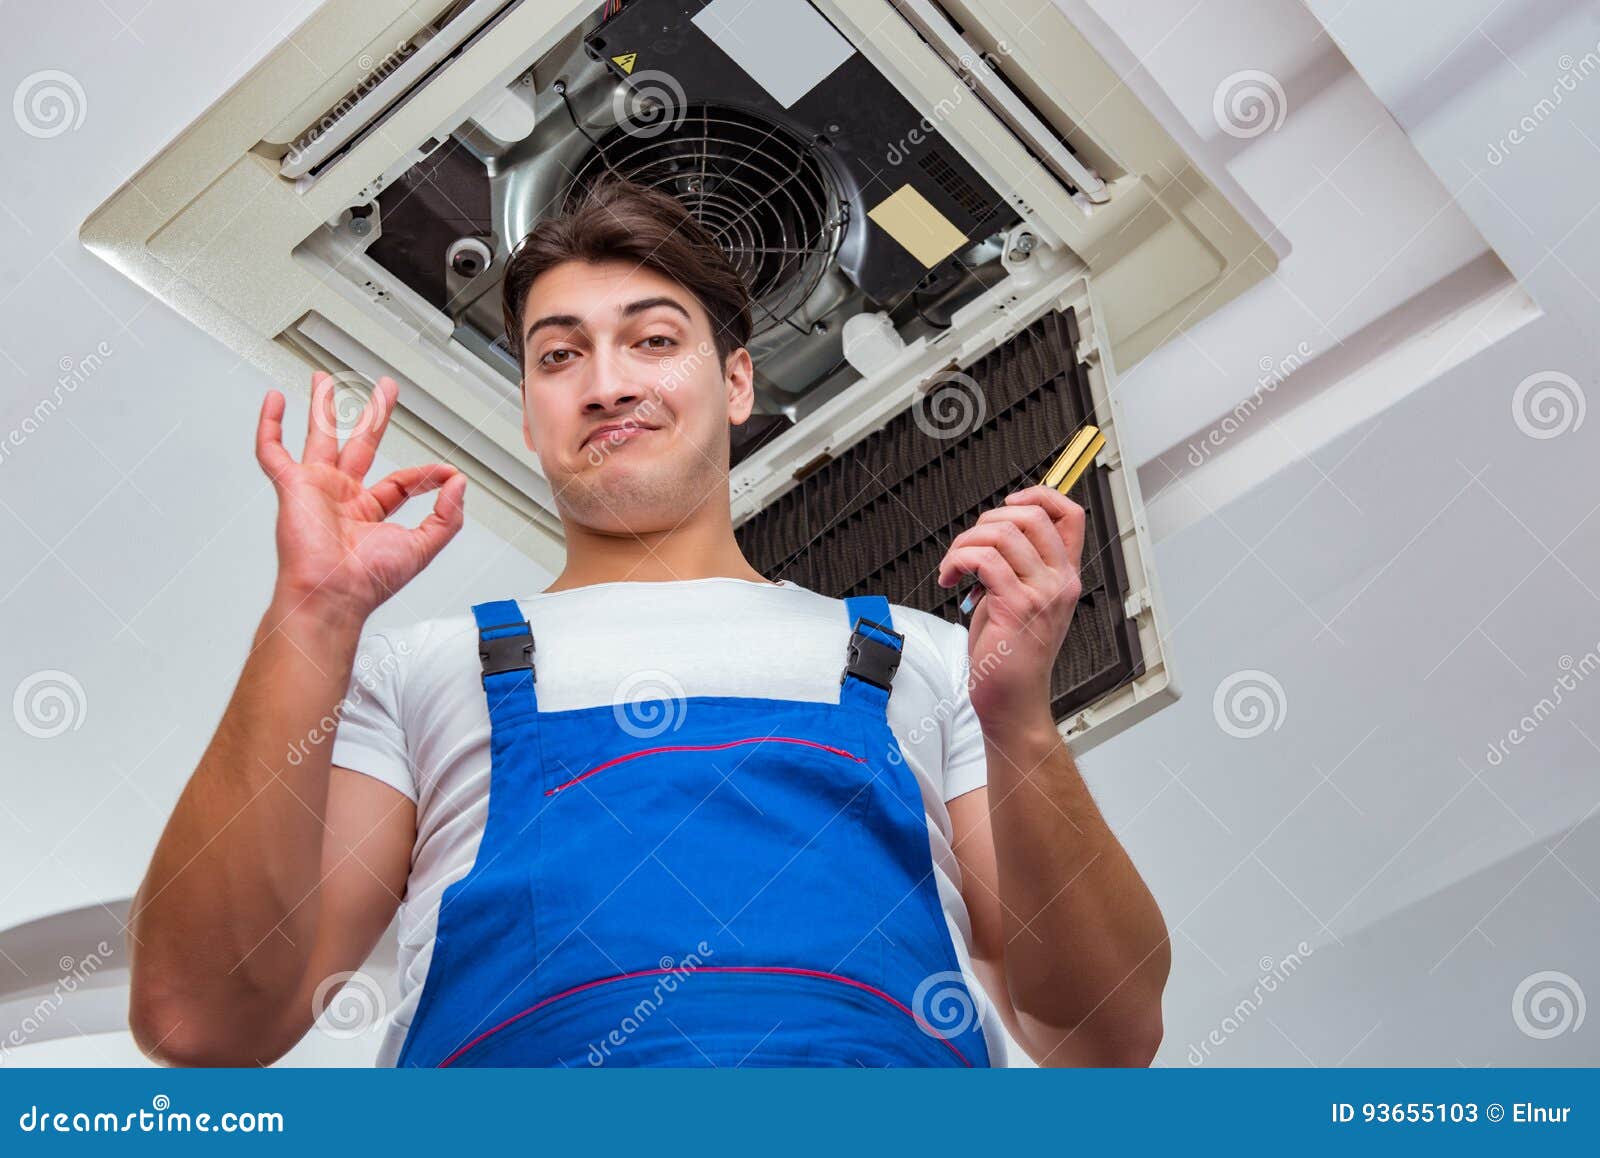 The Worker Repairing Ceiling Air Conditioning Unit Stock Image Image